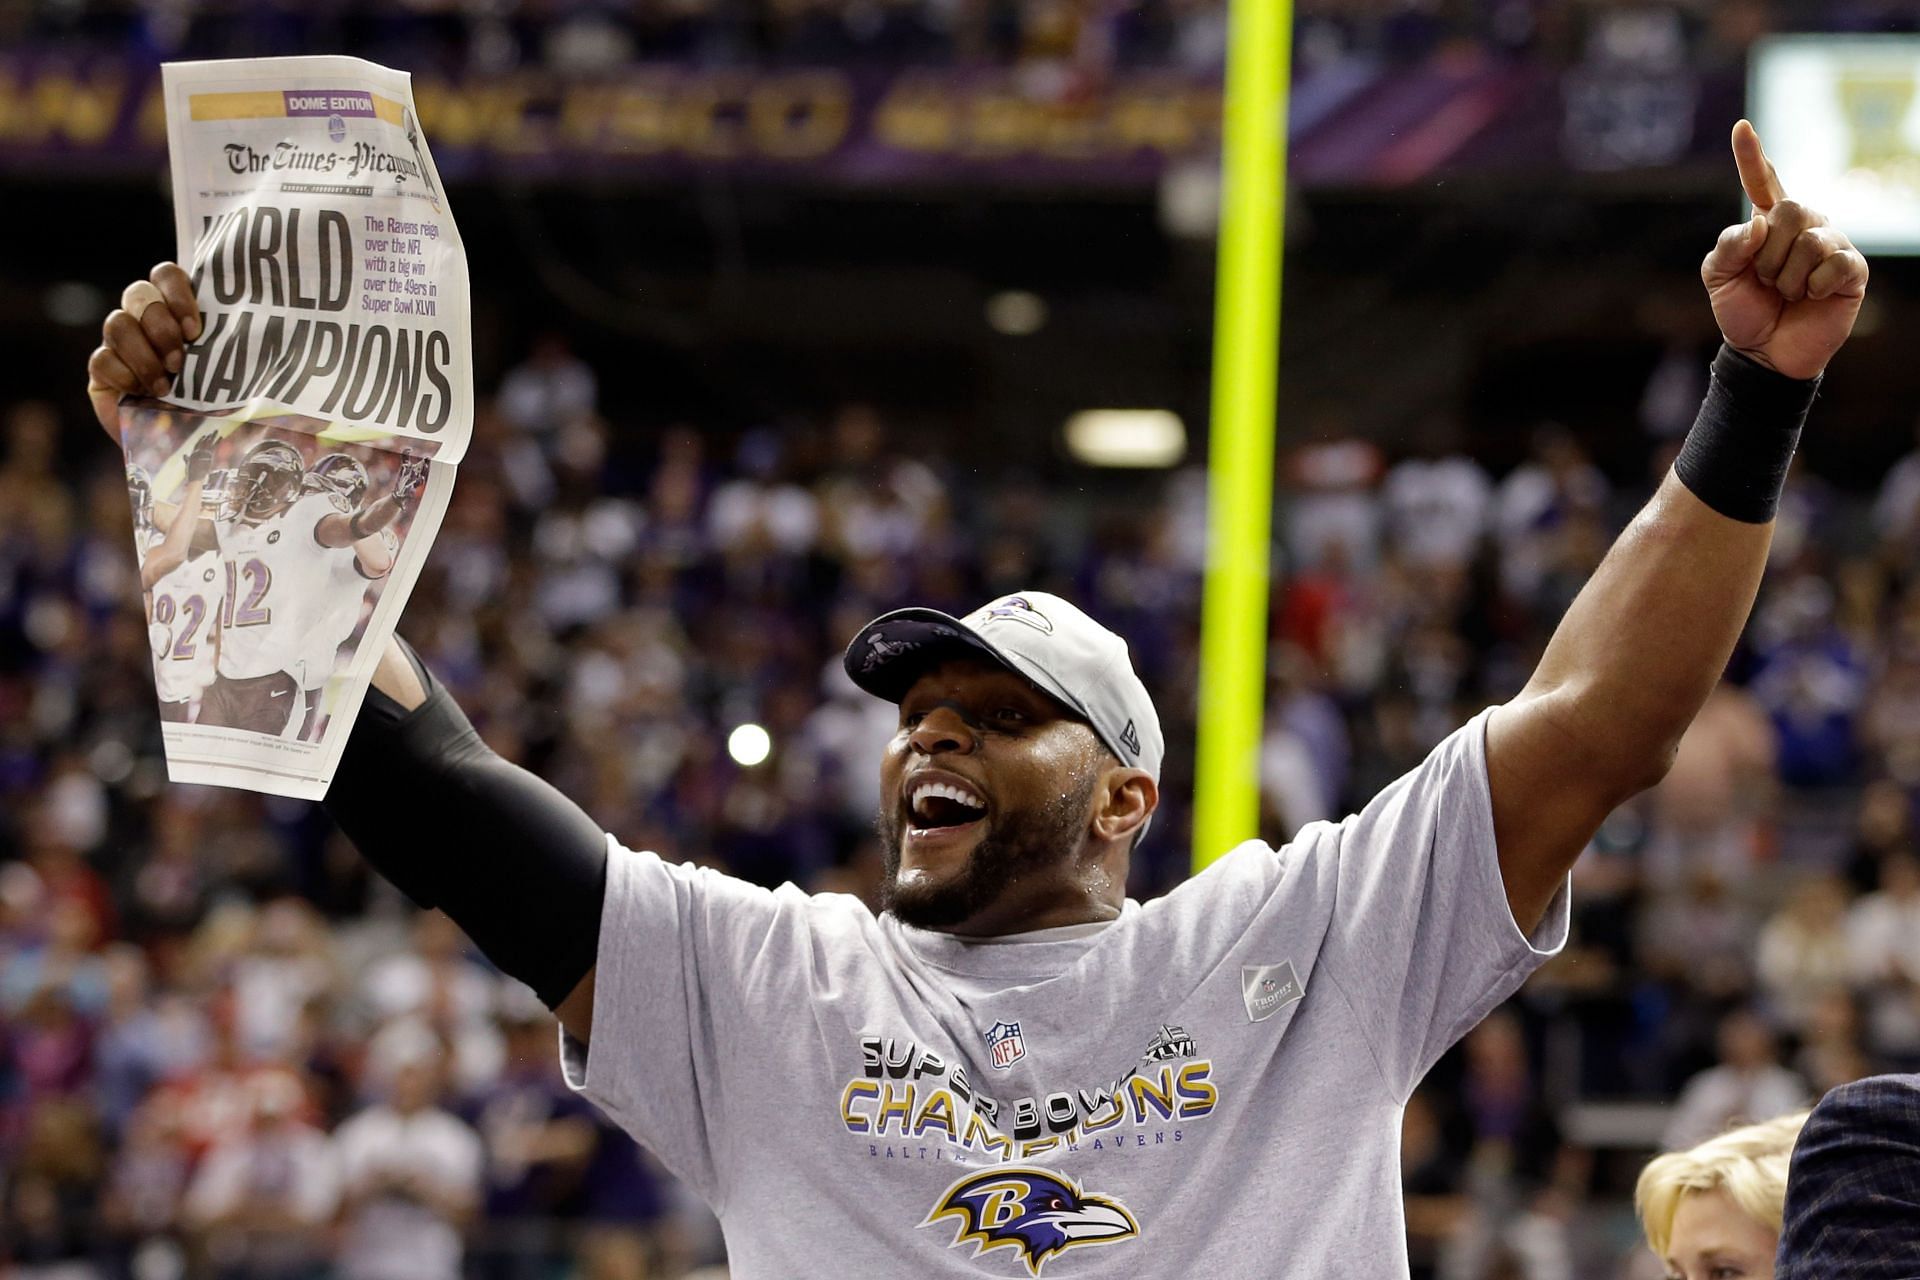 Ray Lewis won two Super Bowls